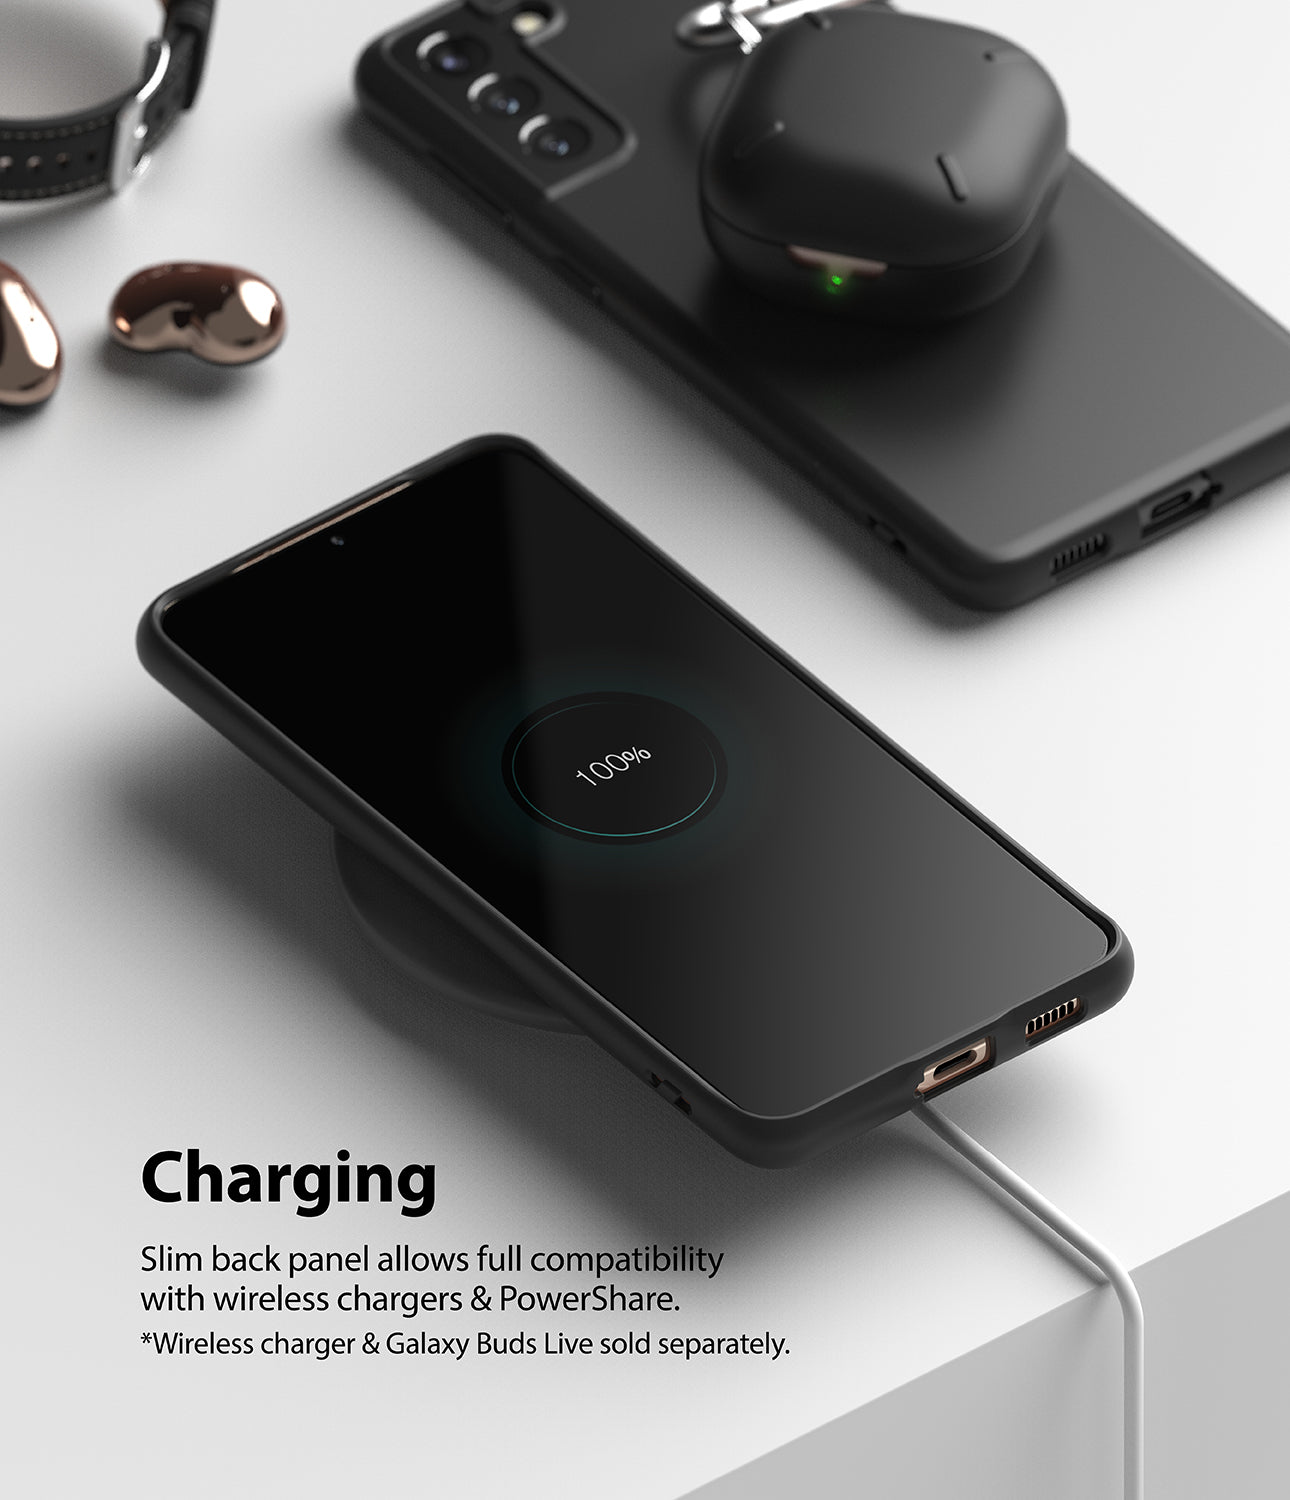 wireless charging and powershare compatible